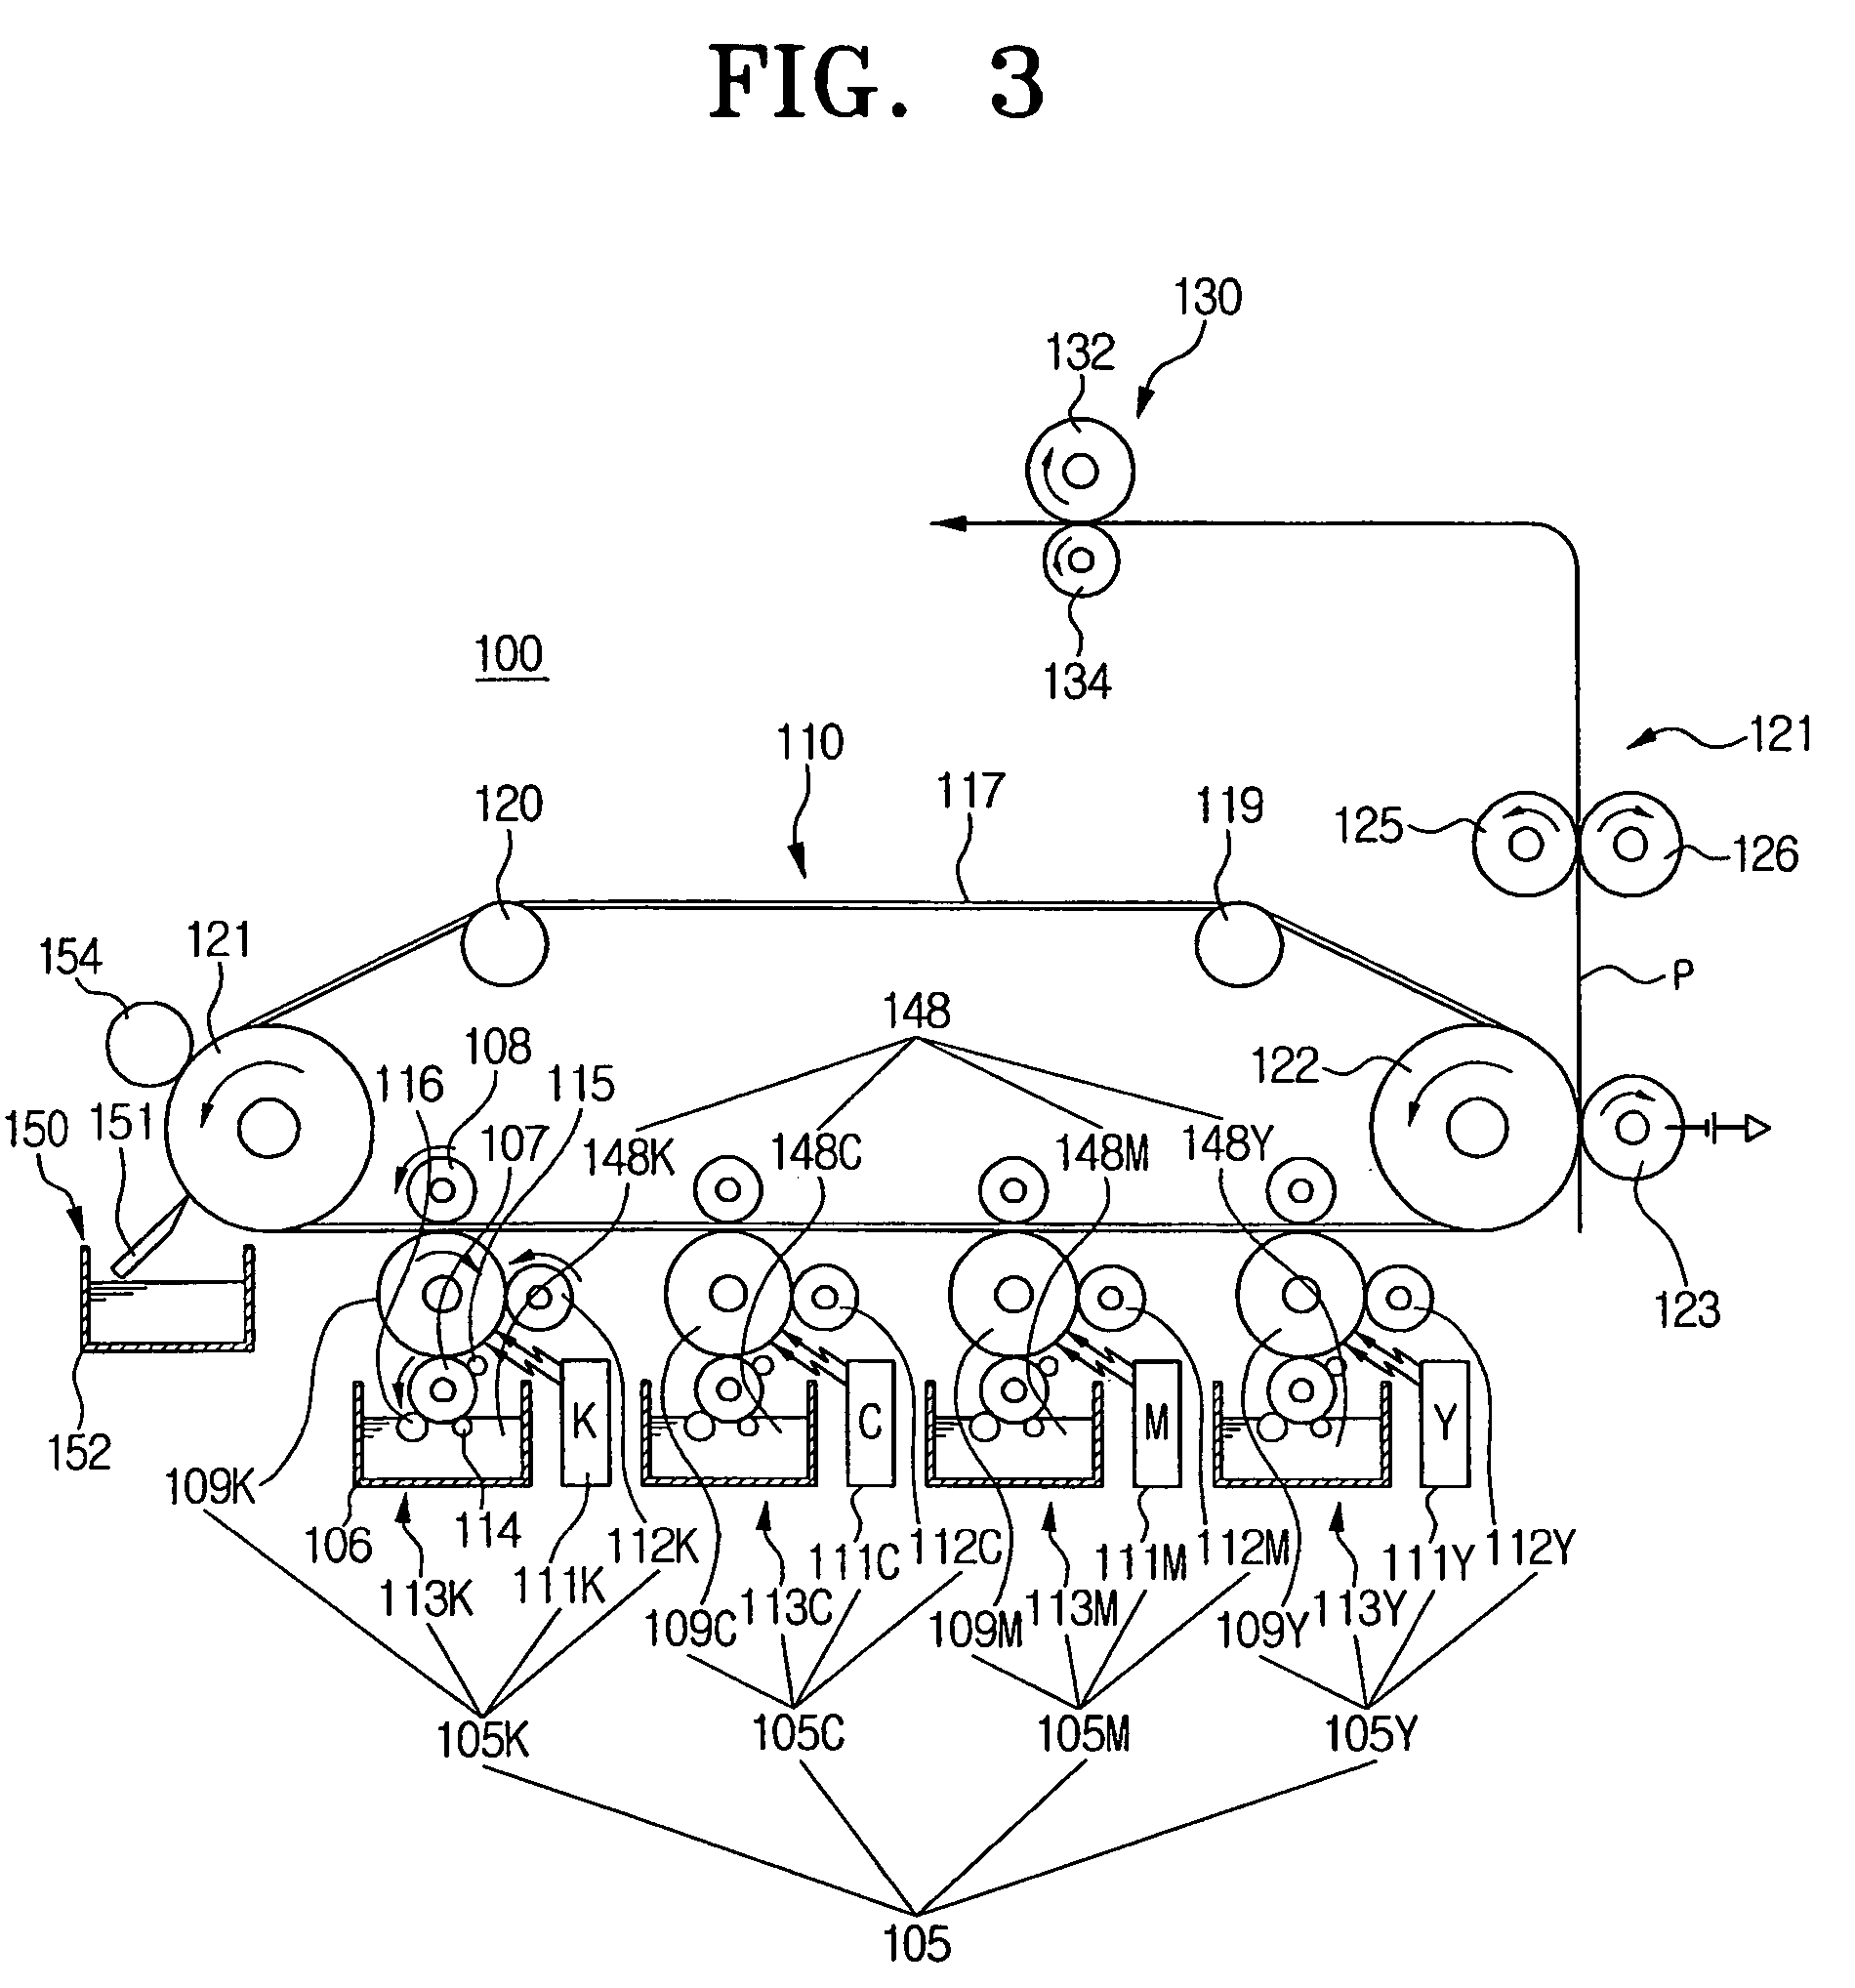 Image forming apparatus and method thereof